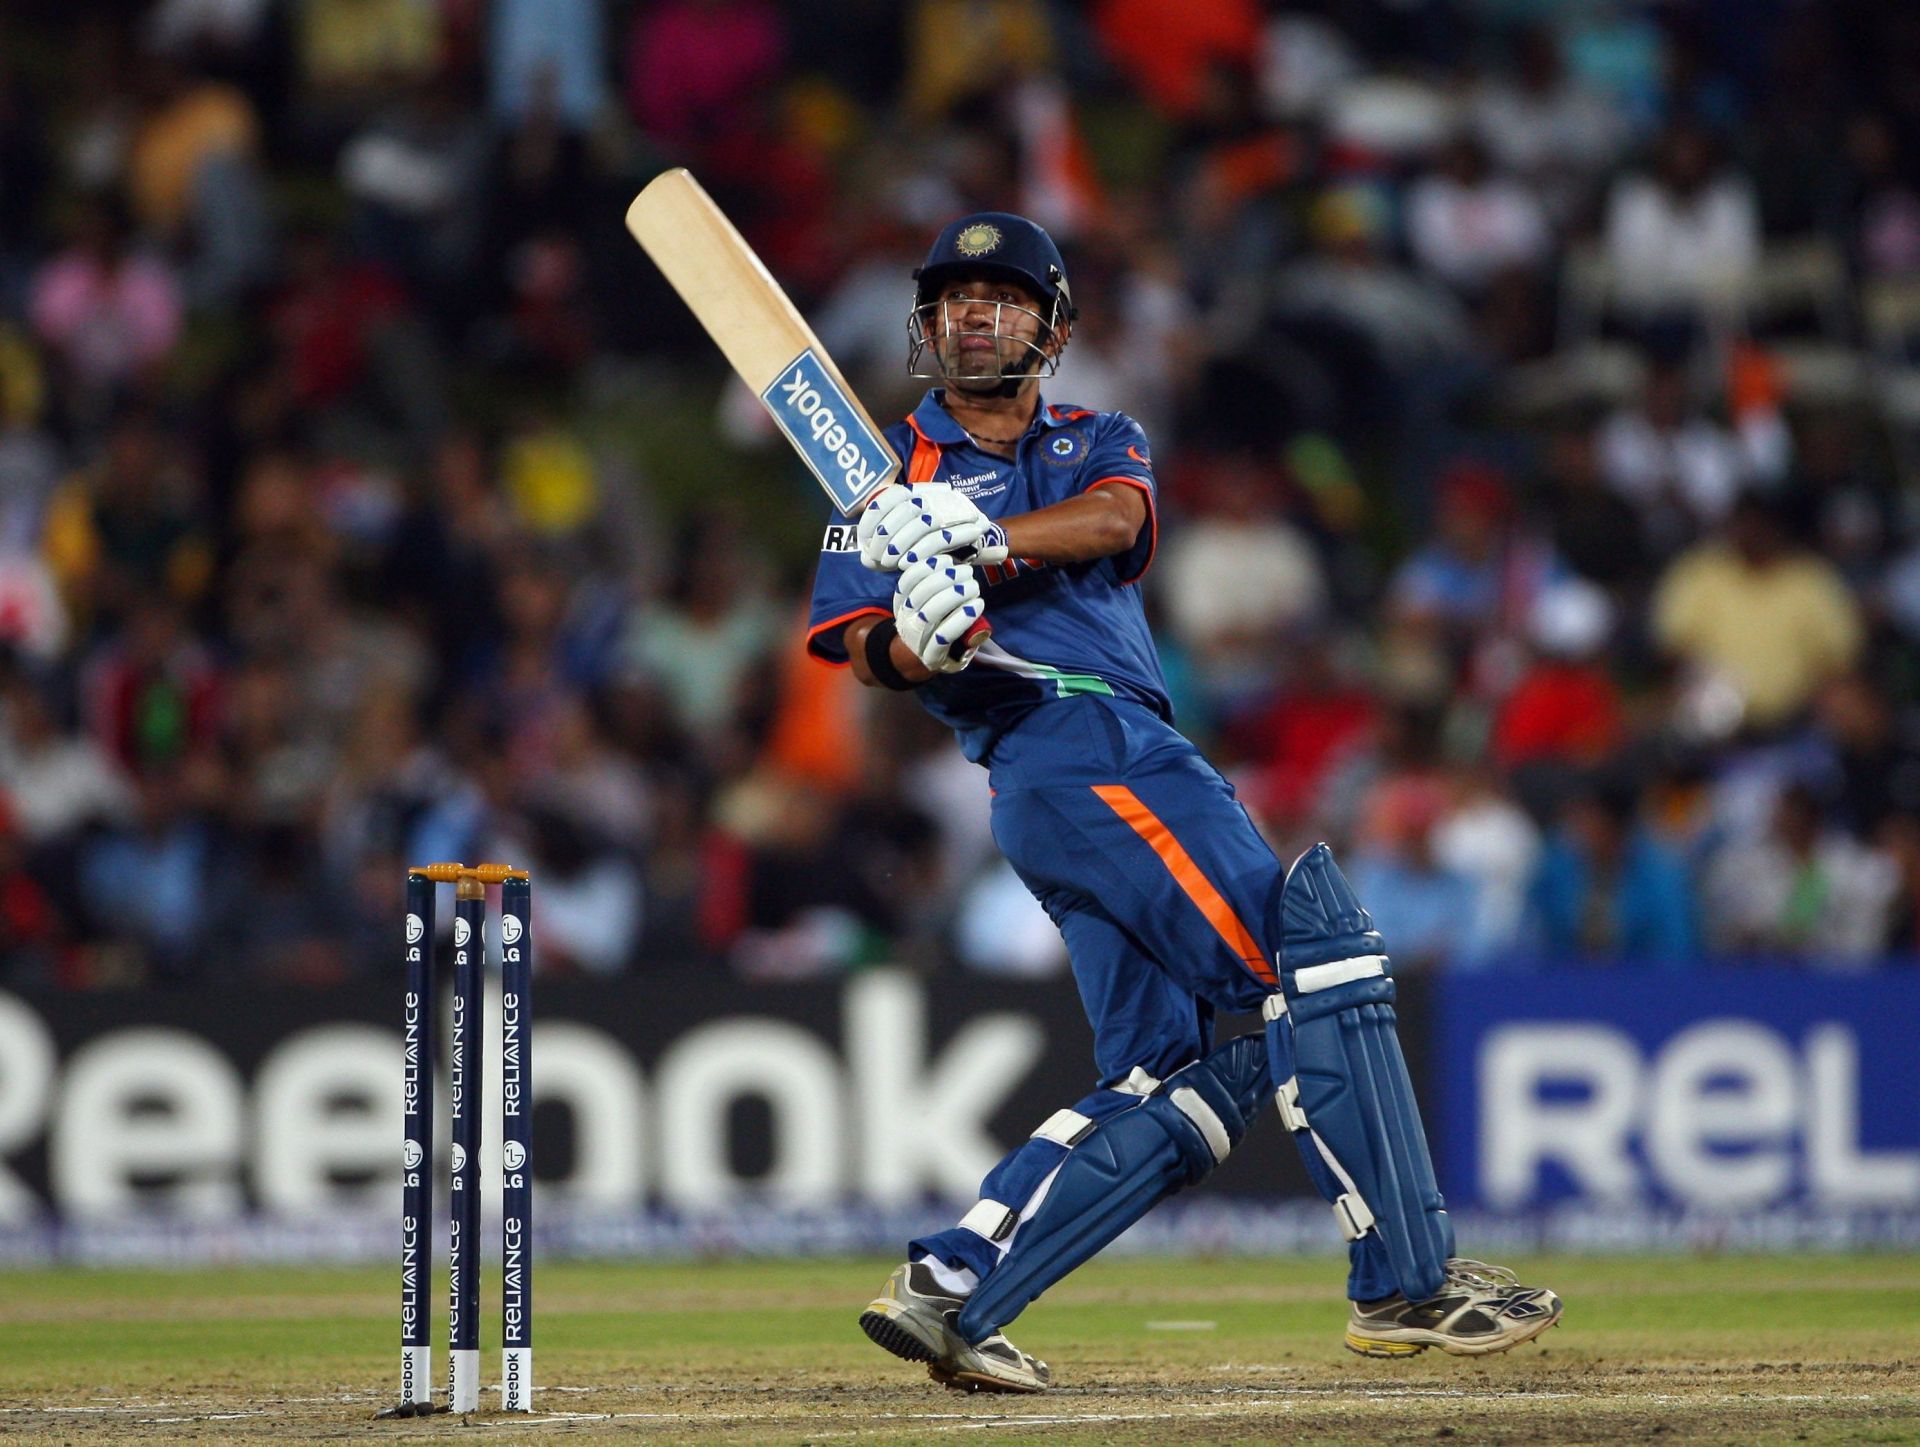 Gambhir was adjudged the Player of the Match